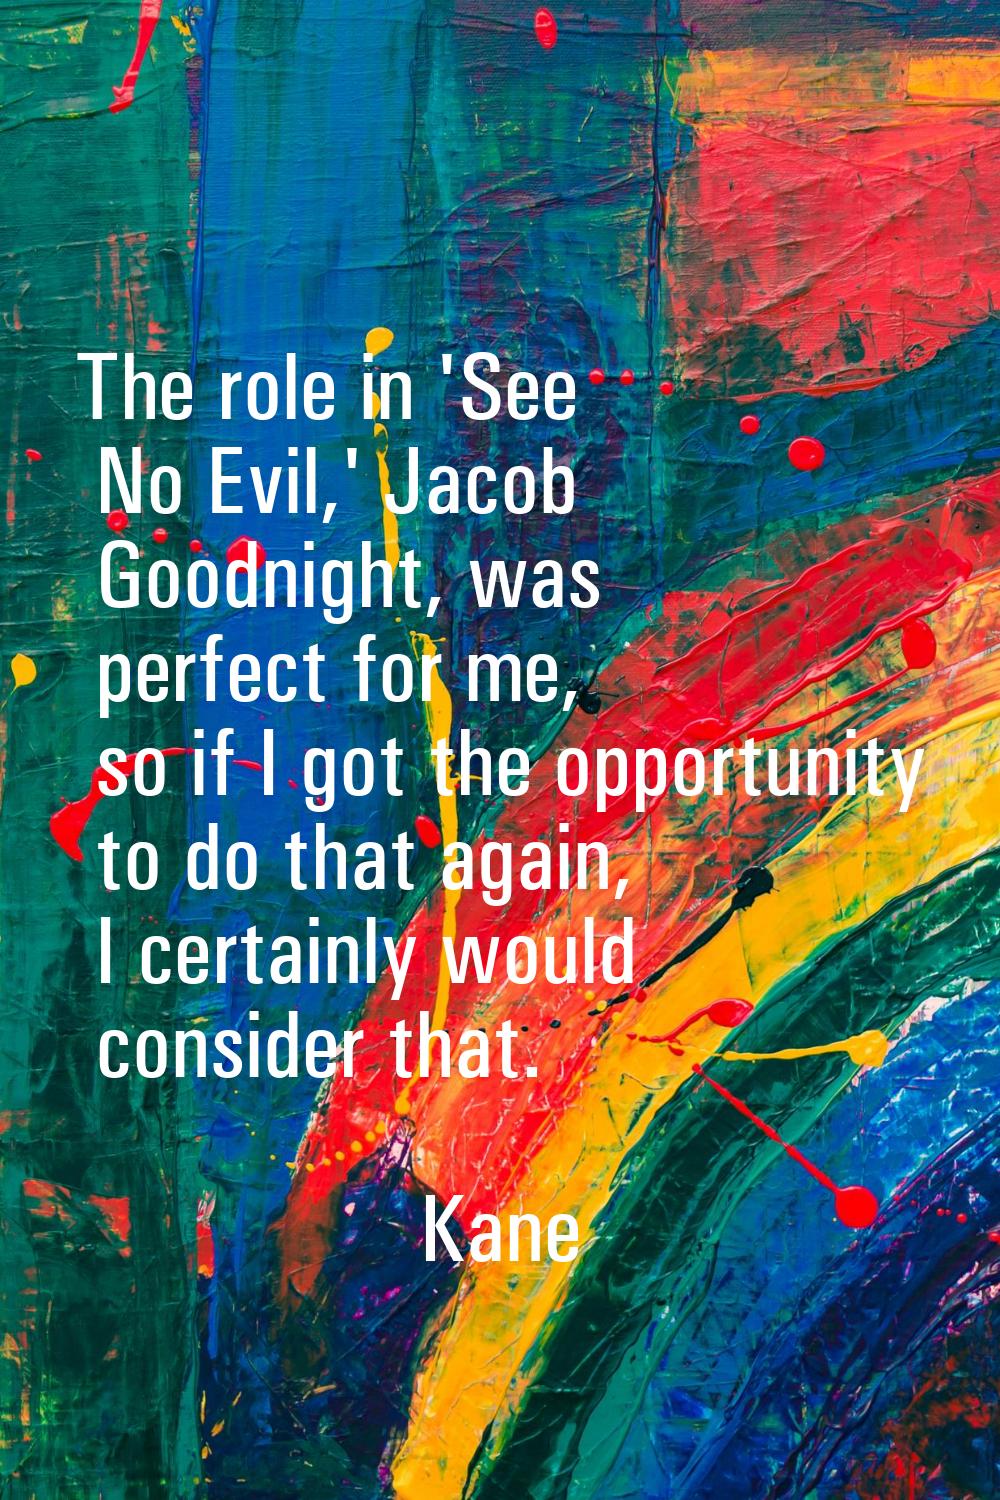 The role in 'See No Evil,' Jacob Goodnight, was perfect for me, so if I got the opportunity to do t